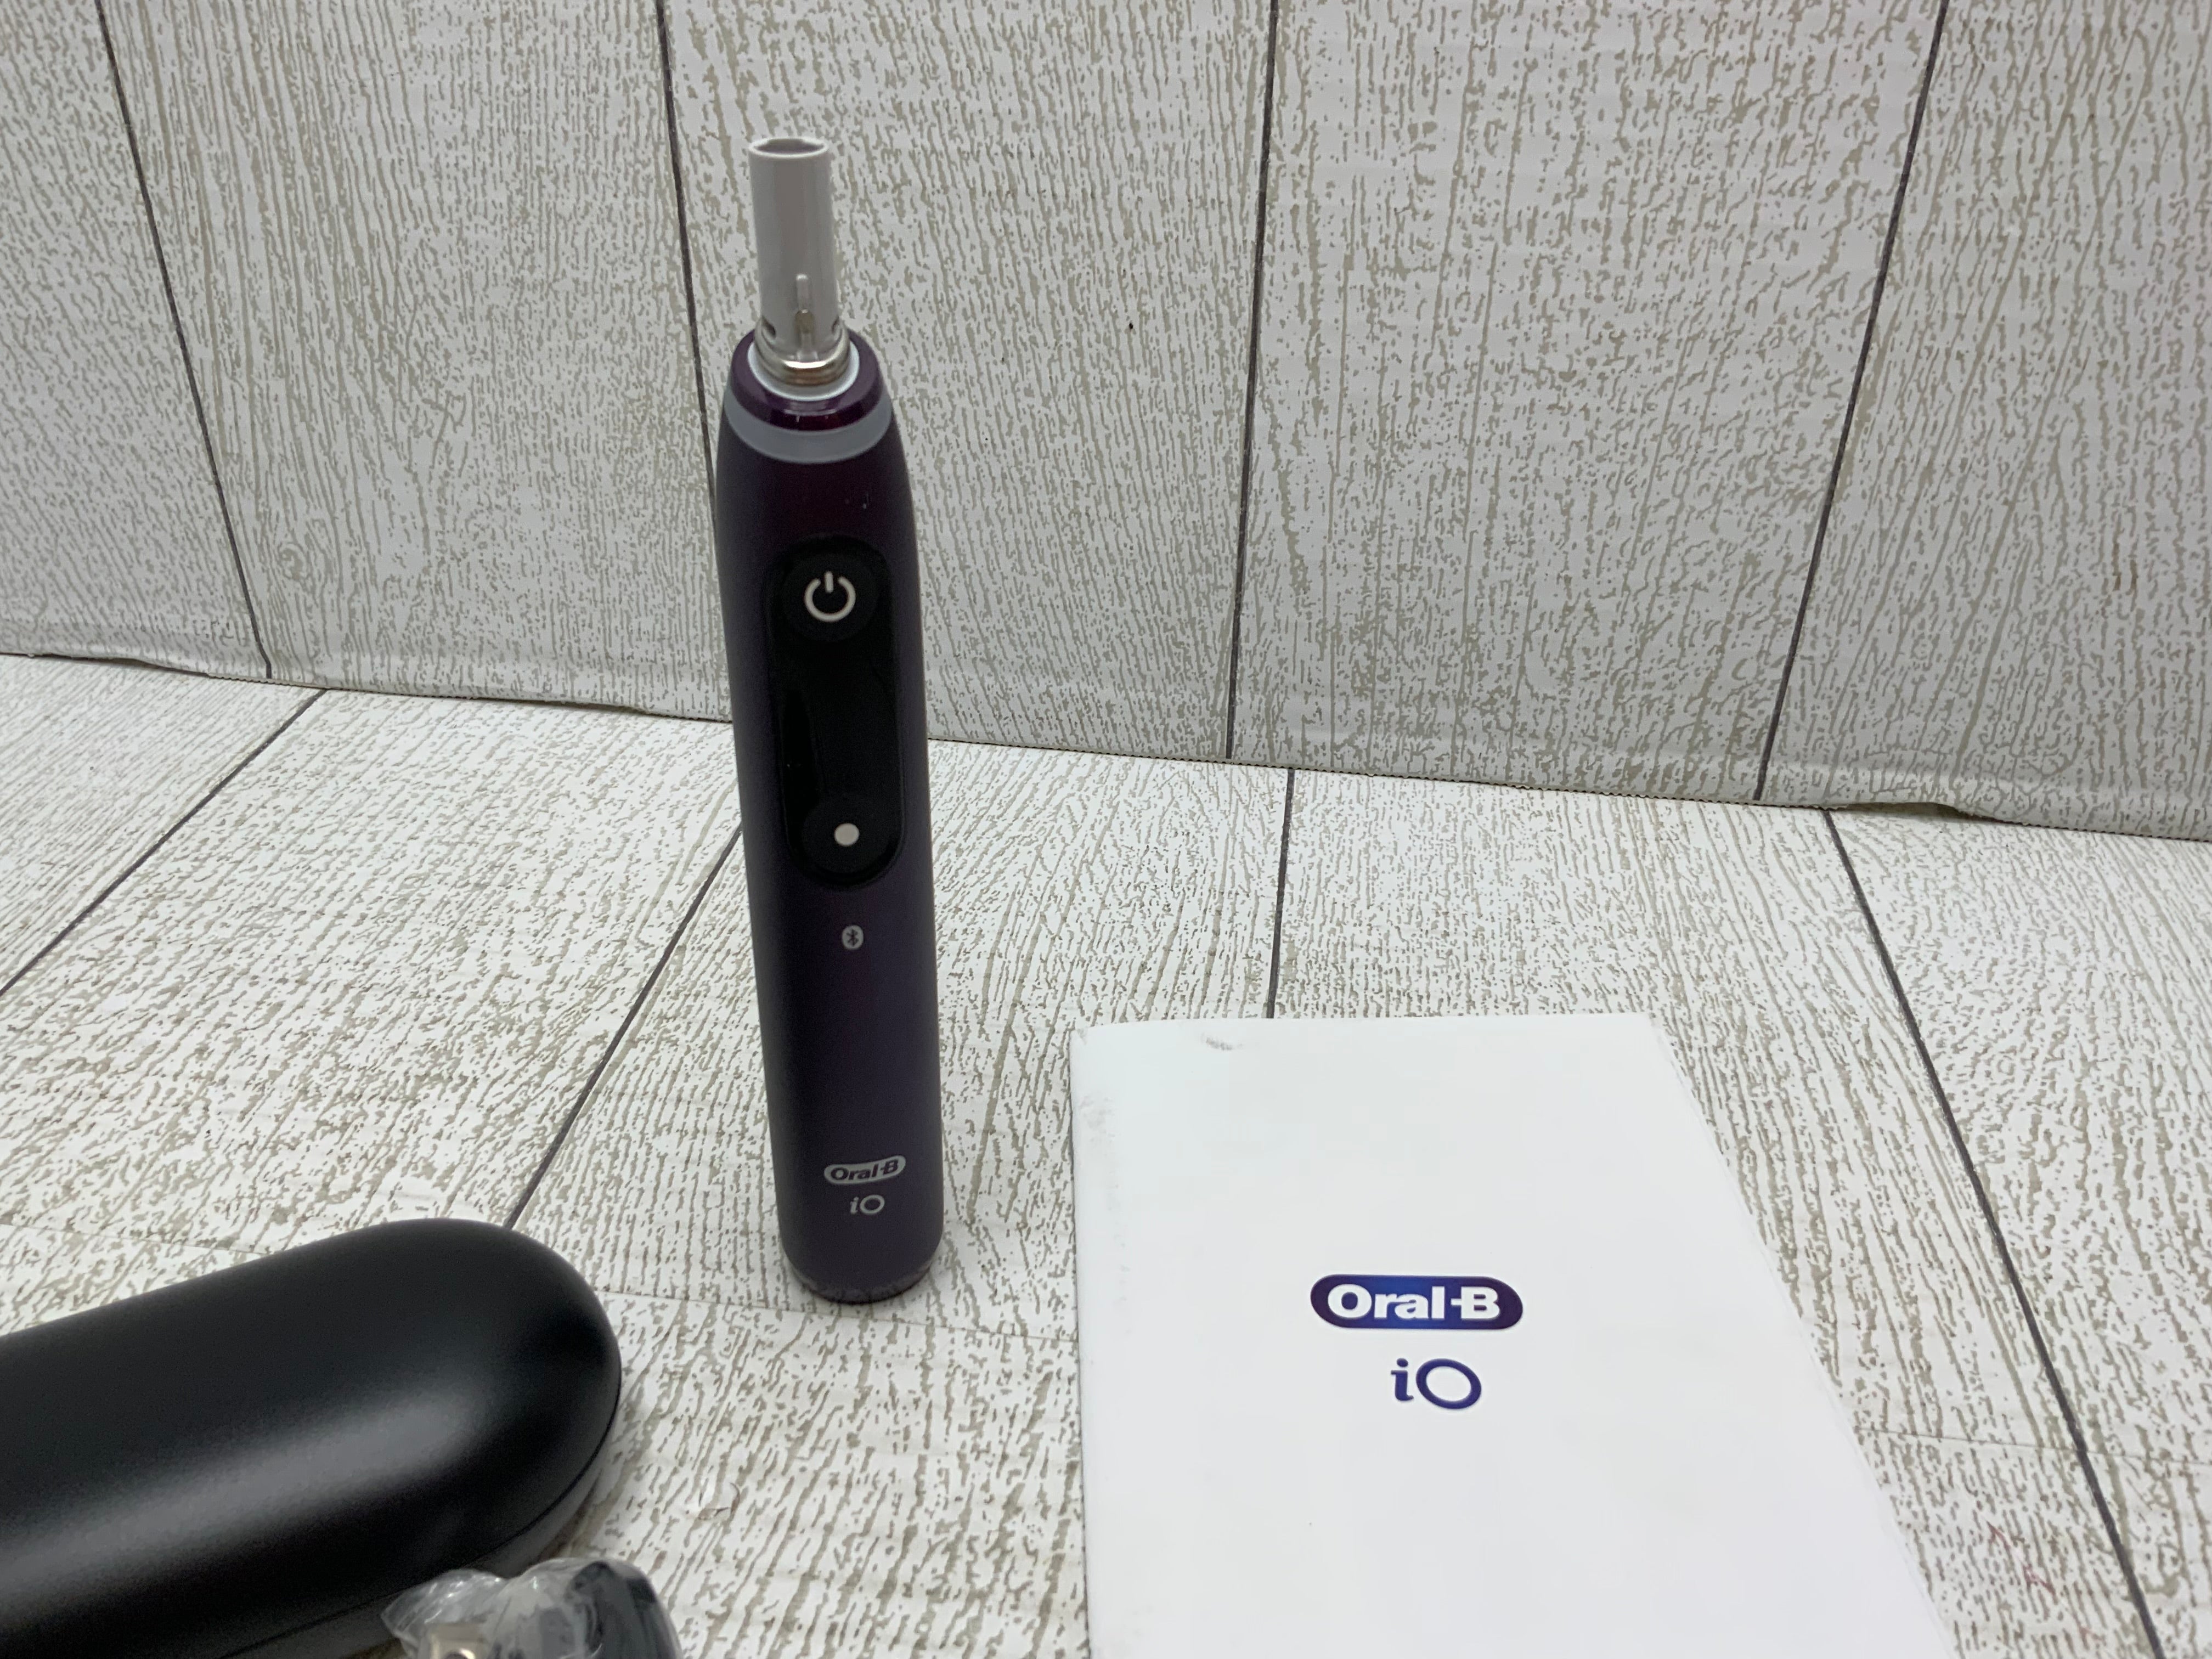 Oral-B iO Series 8 Electric Toothbrush with 2 Replacement Brush Heads, Violet Ametrine (8050792104174)